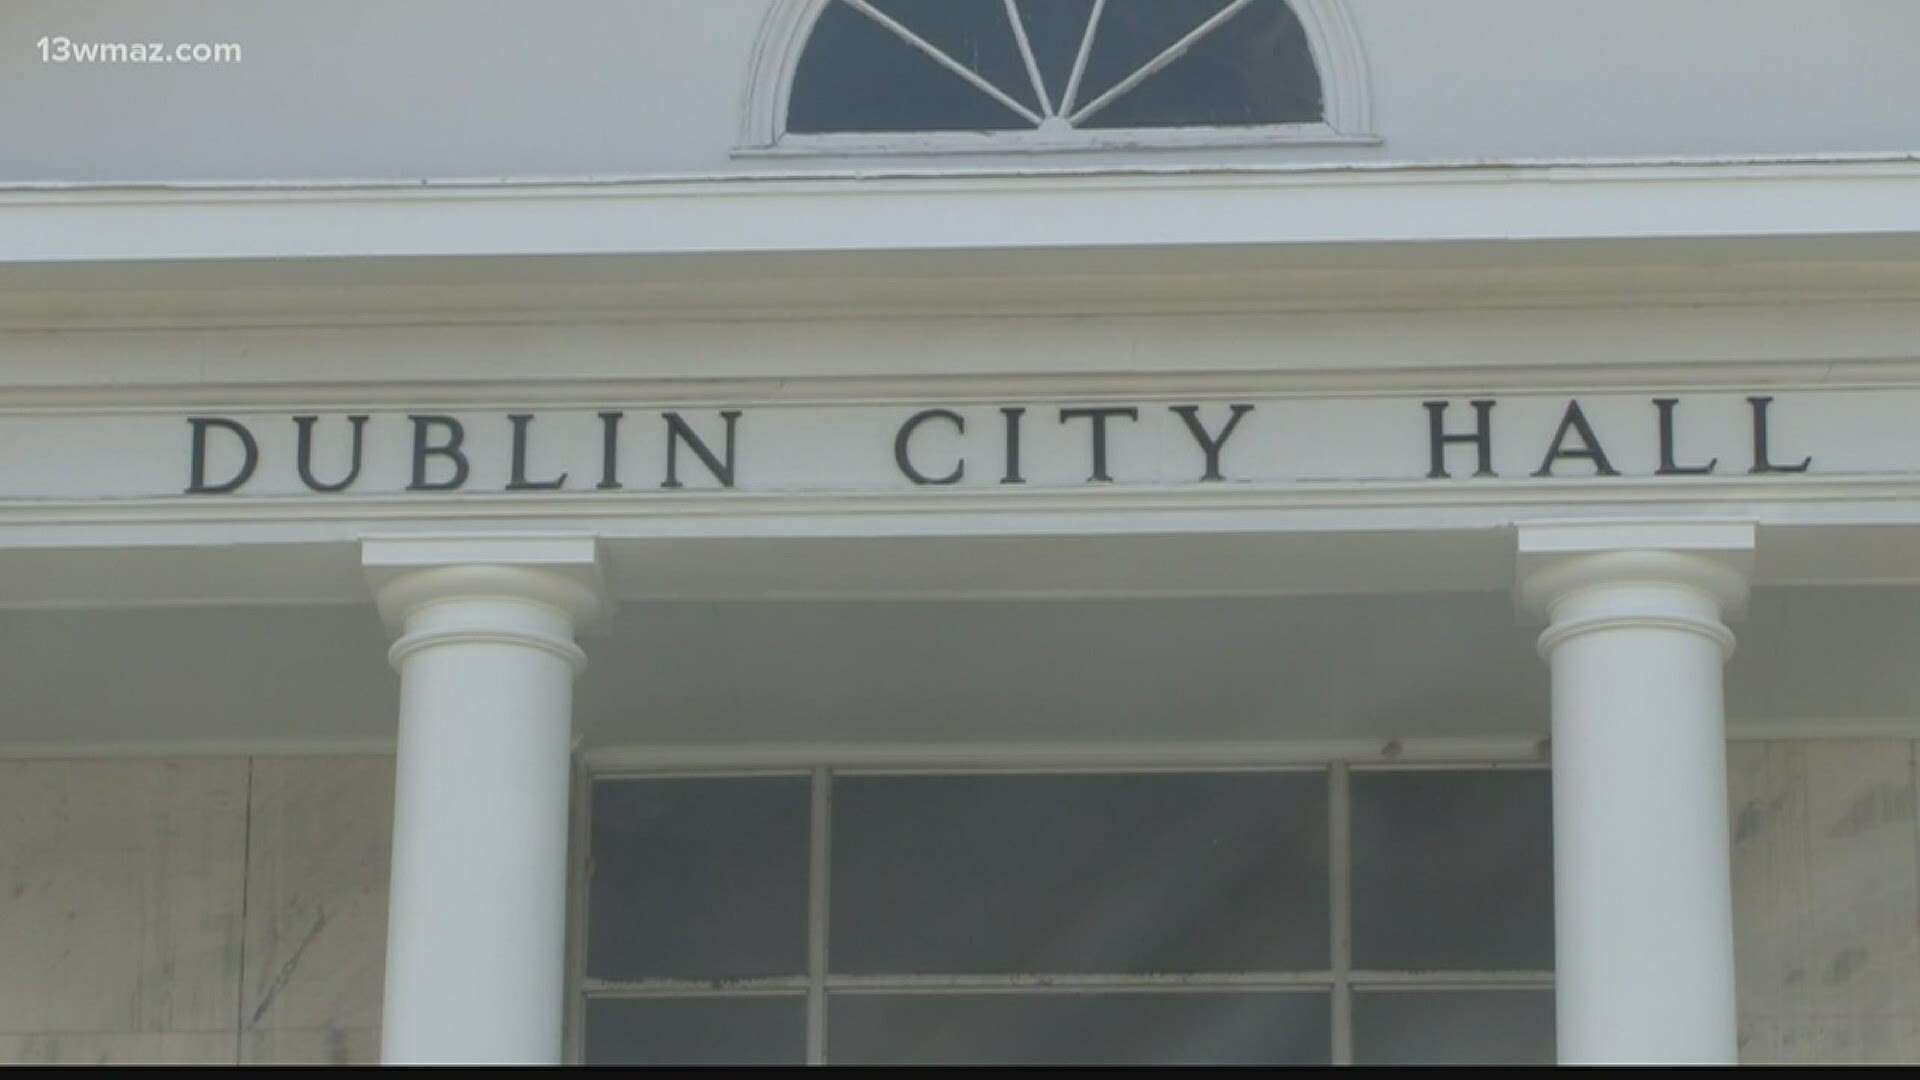 The City of Dublin is starting a new task force devoted to talking about race relations.